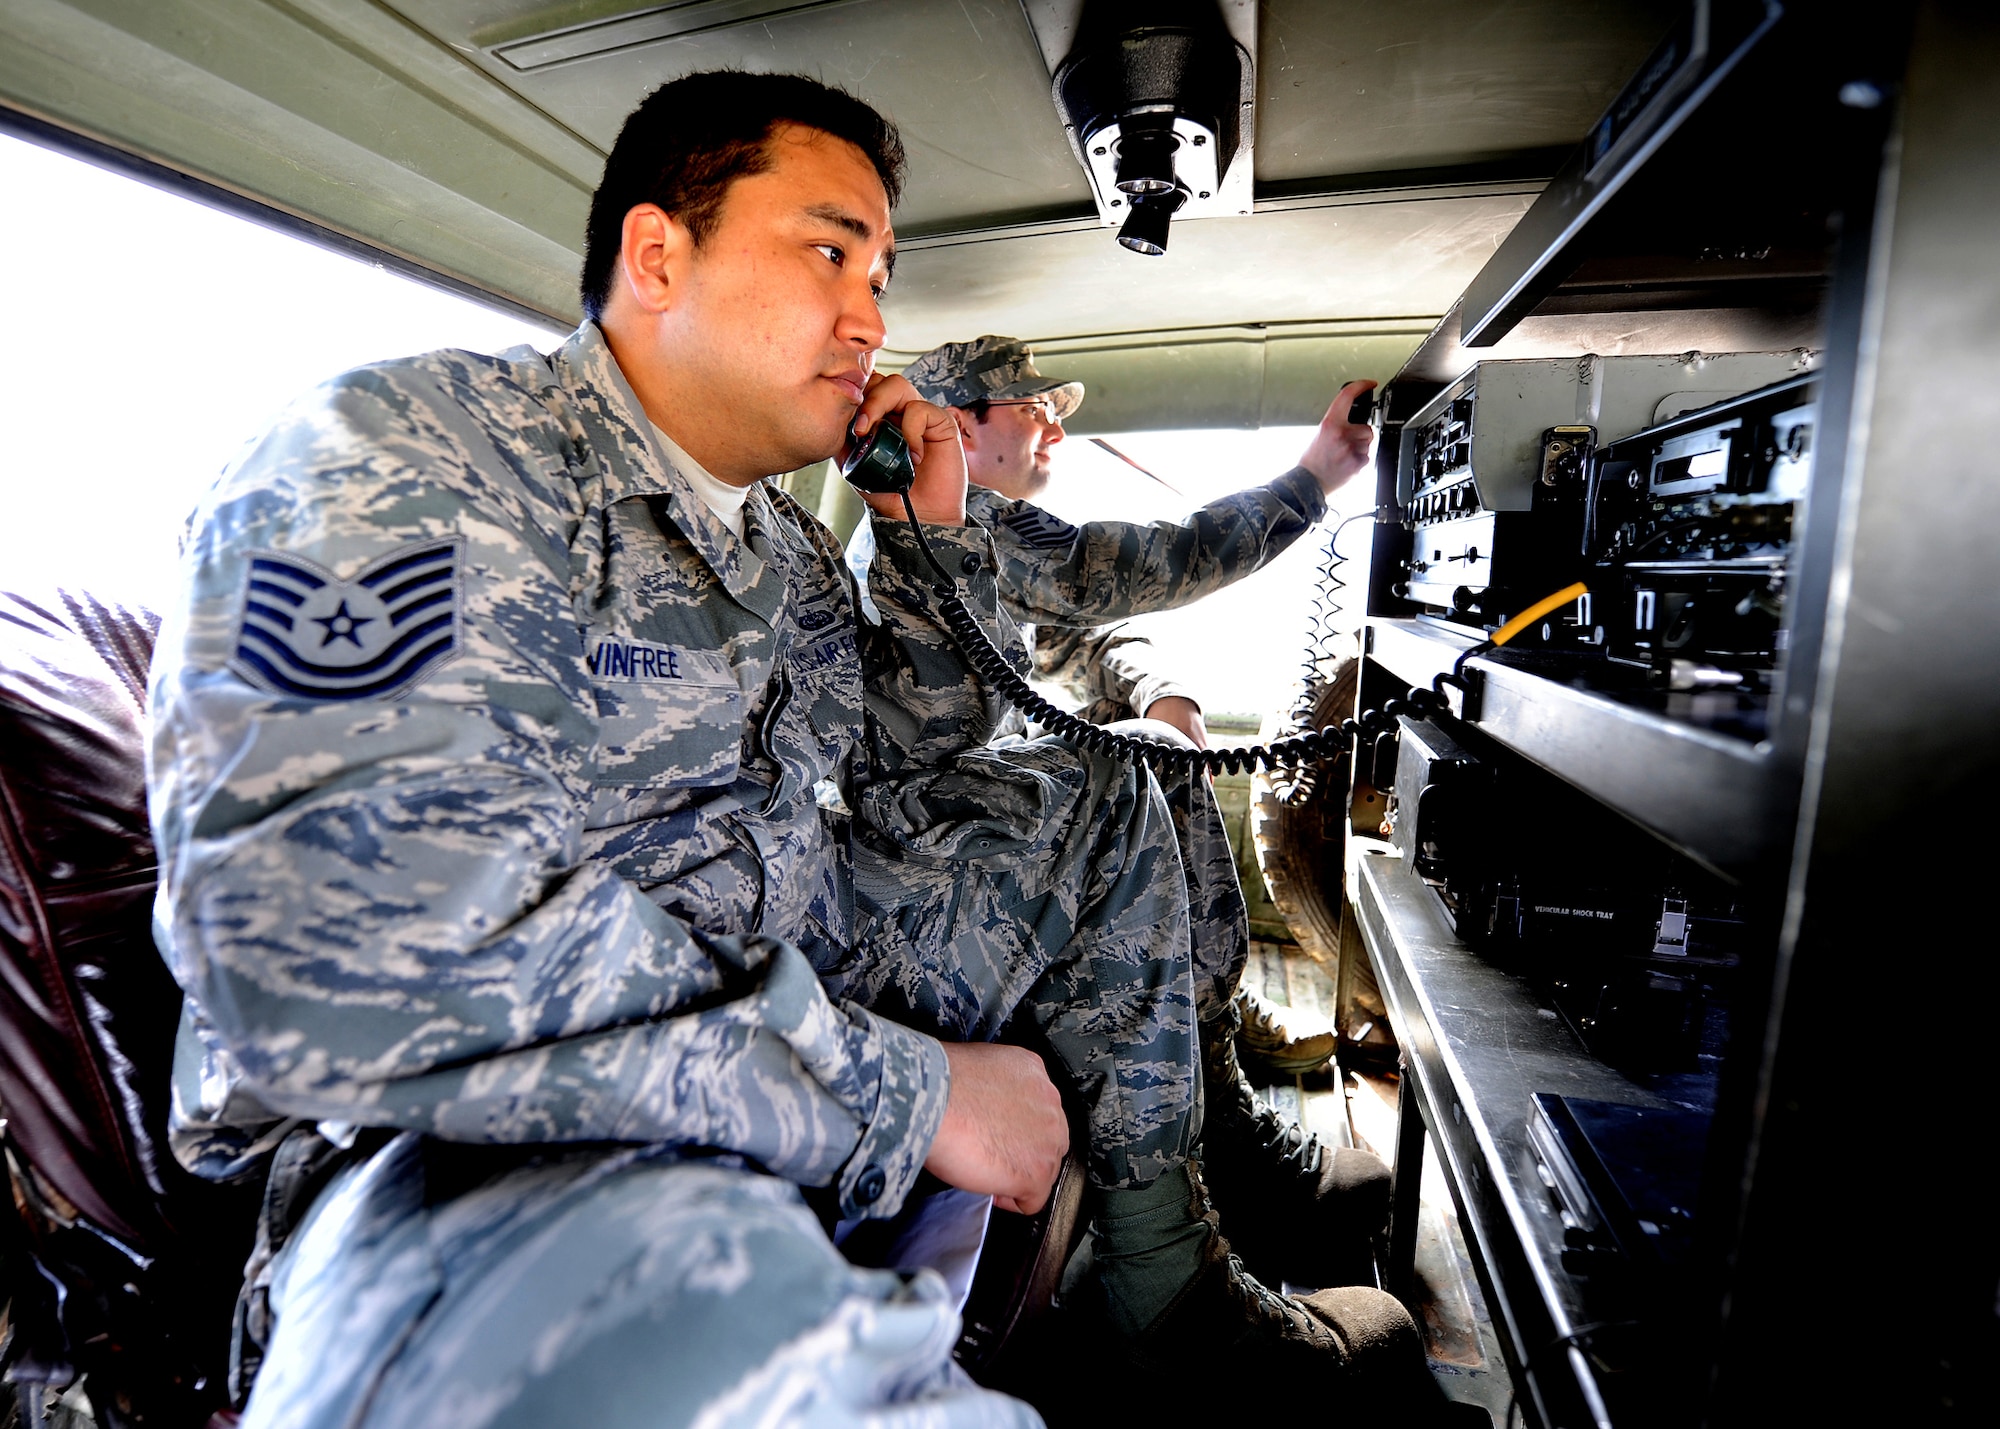 Technical Sgt. Claudio Winfree and Tech. Sgt. Brian De Luca, 571st Mobility Support Advisory Squadron air advisors, perform an operations check on the communication equipment in the Honduran Air Force tactical communication vehicle at Col. Hernán Acosta Mejia Air Base, Tegucigalpa, Honduras, Feb. 7.  (U.S. Air Force photo by Tech. Sgt. Lesley Waters)